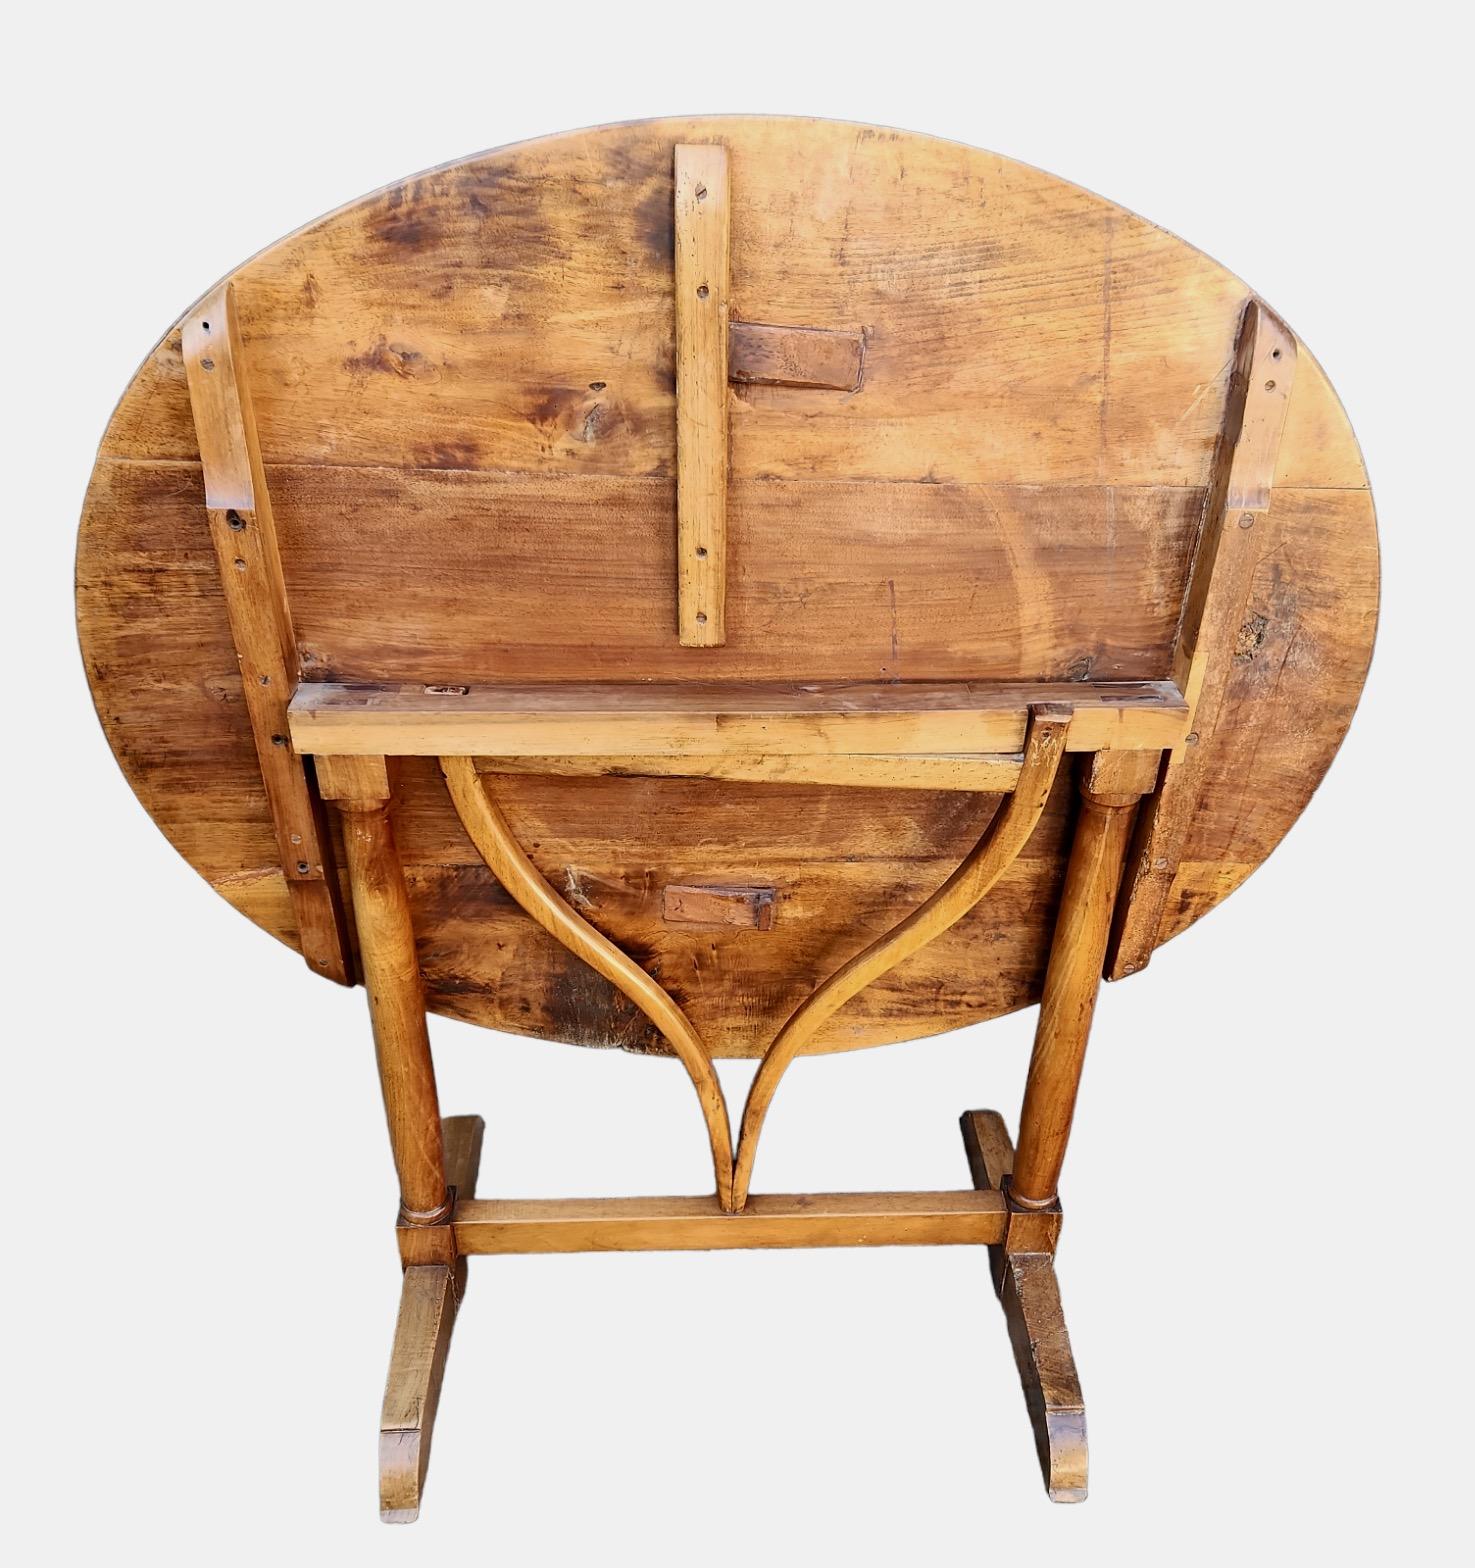 Rustic 19th Century French Flip Table For Sale